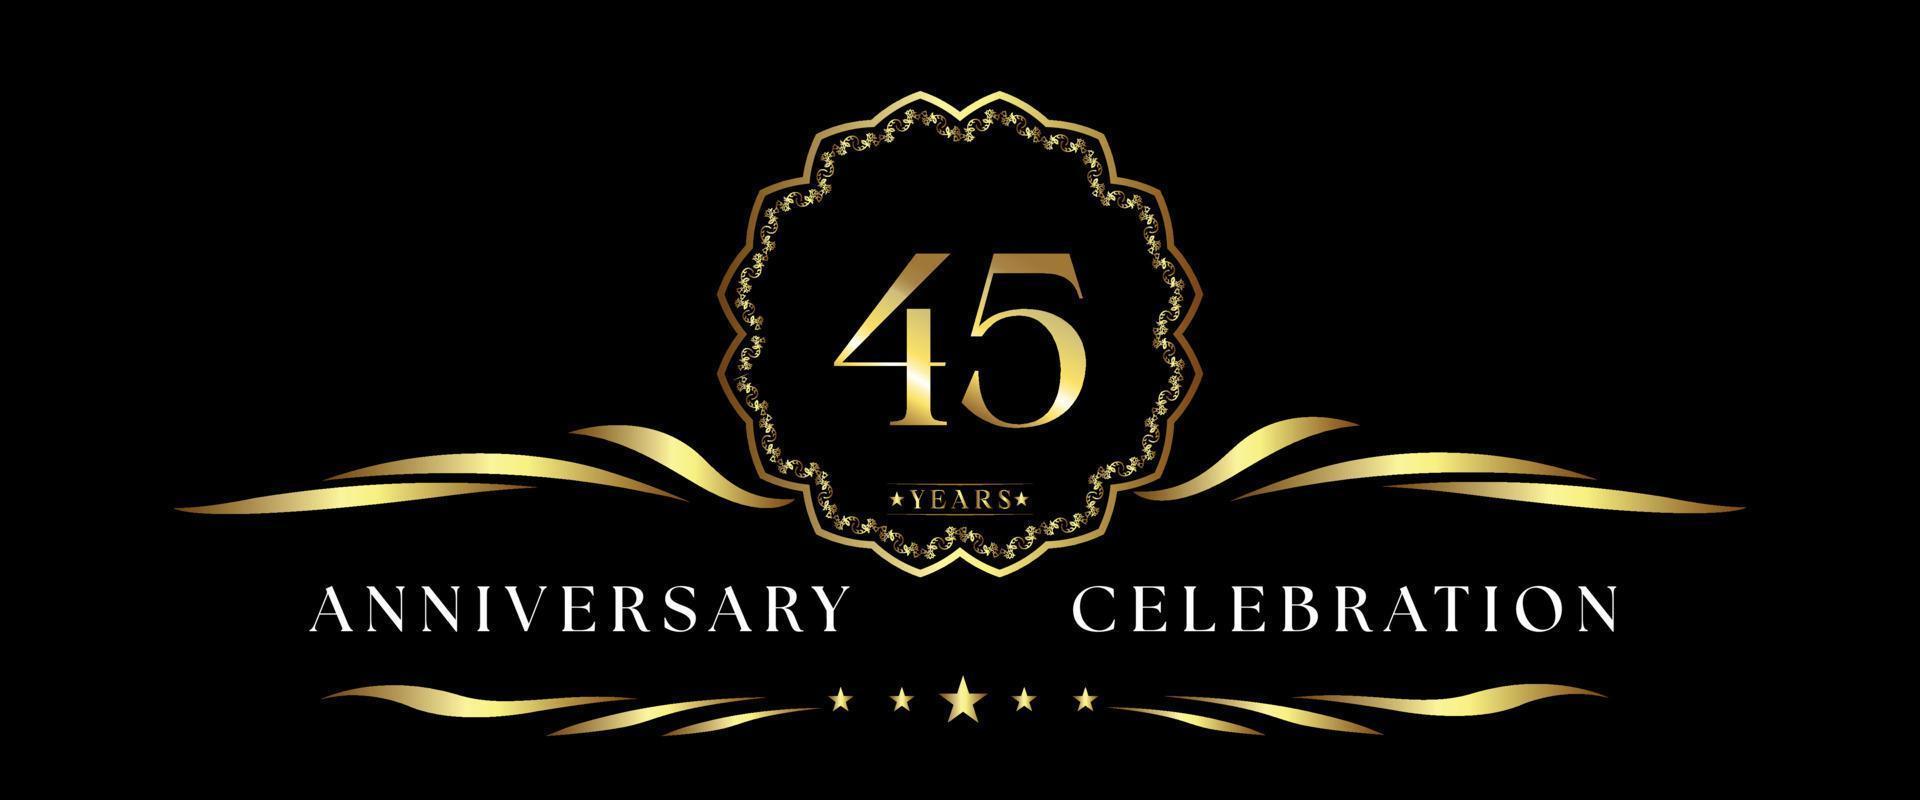 45 years anniversary celebration with gold decorative frame isolated on black background. Vector design for greeting card, birthday party, wedding, event party, ceremony. 45 years Anniversary logo.